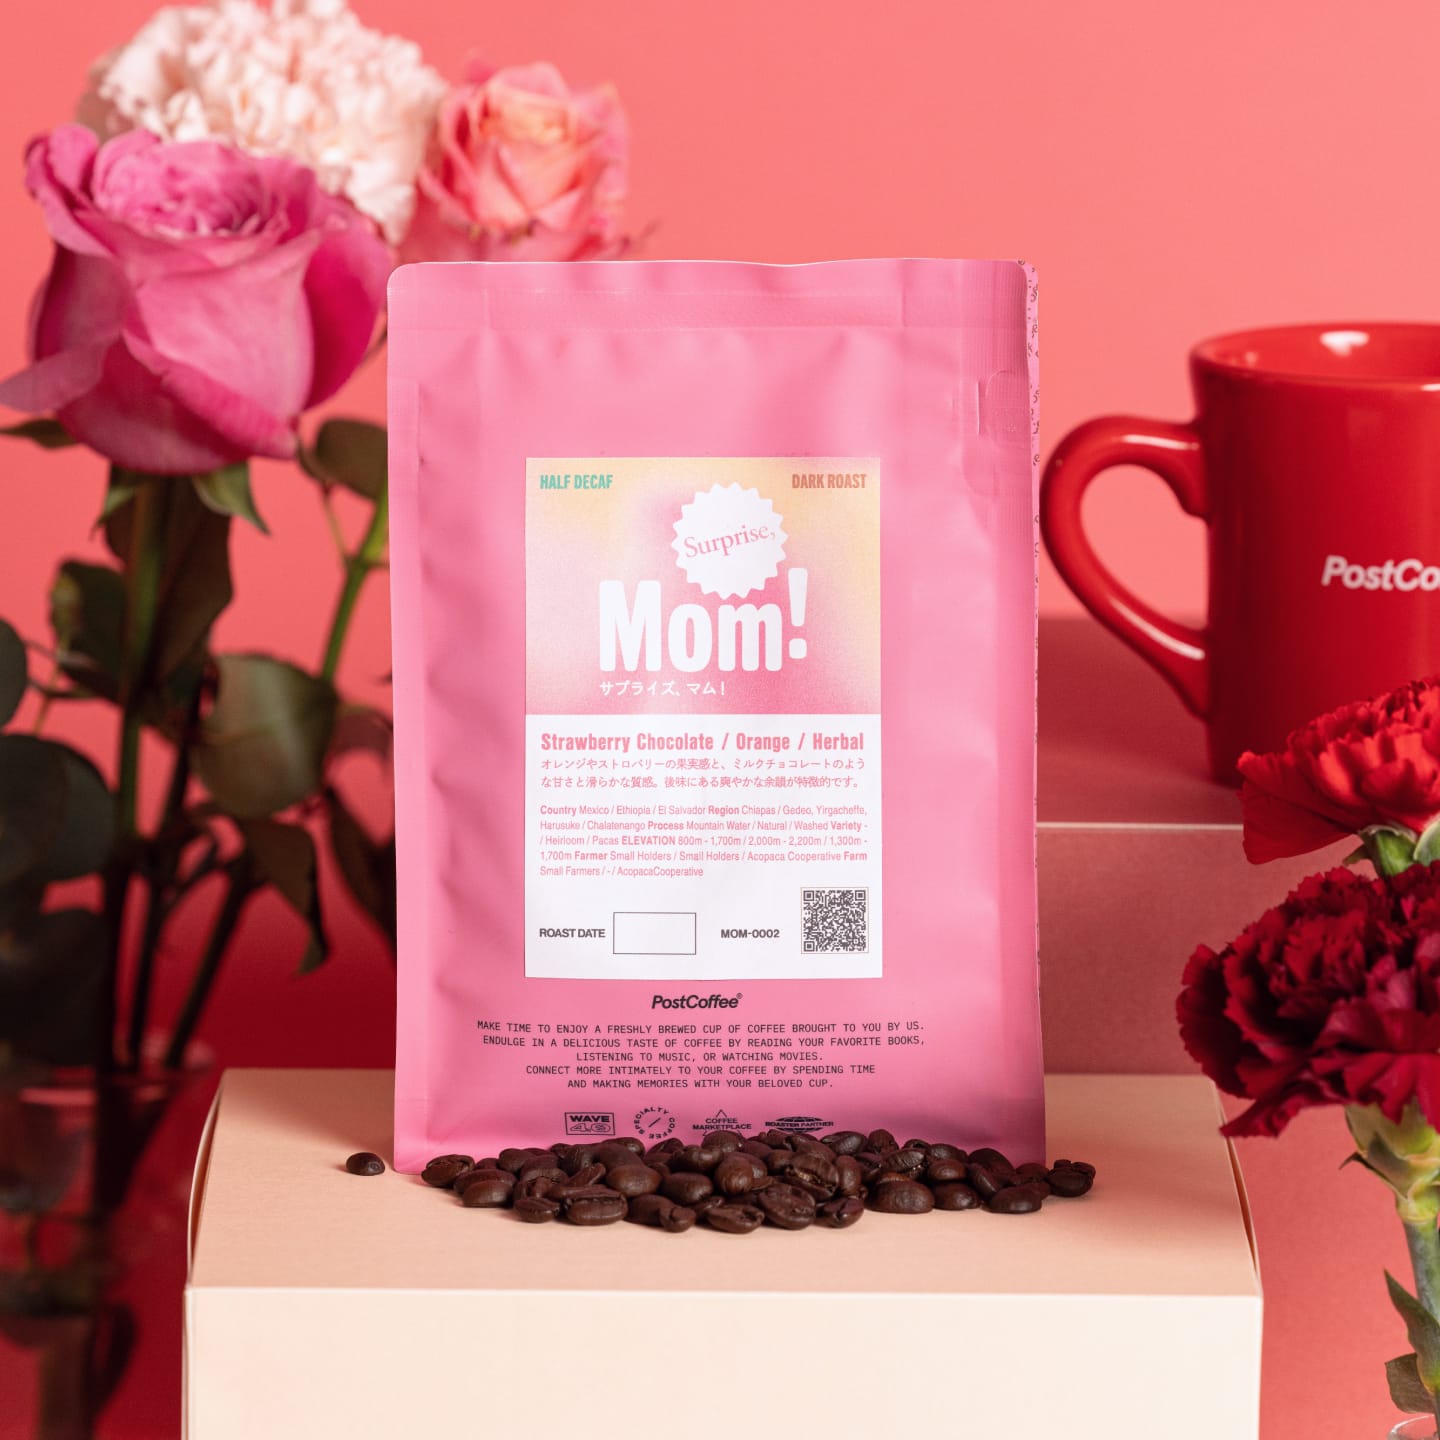 Special coffee for Mother's Day, 'Surprise, Mom!'